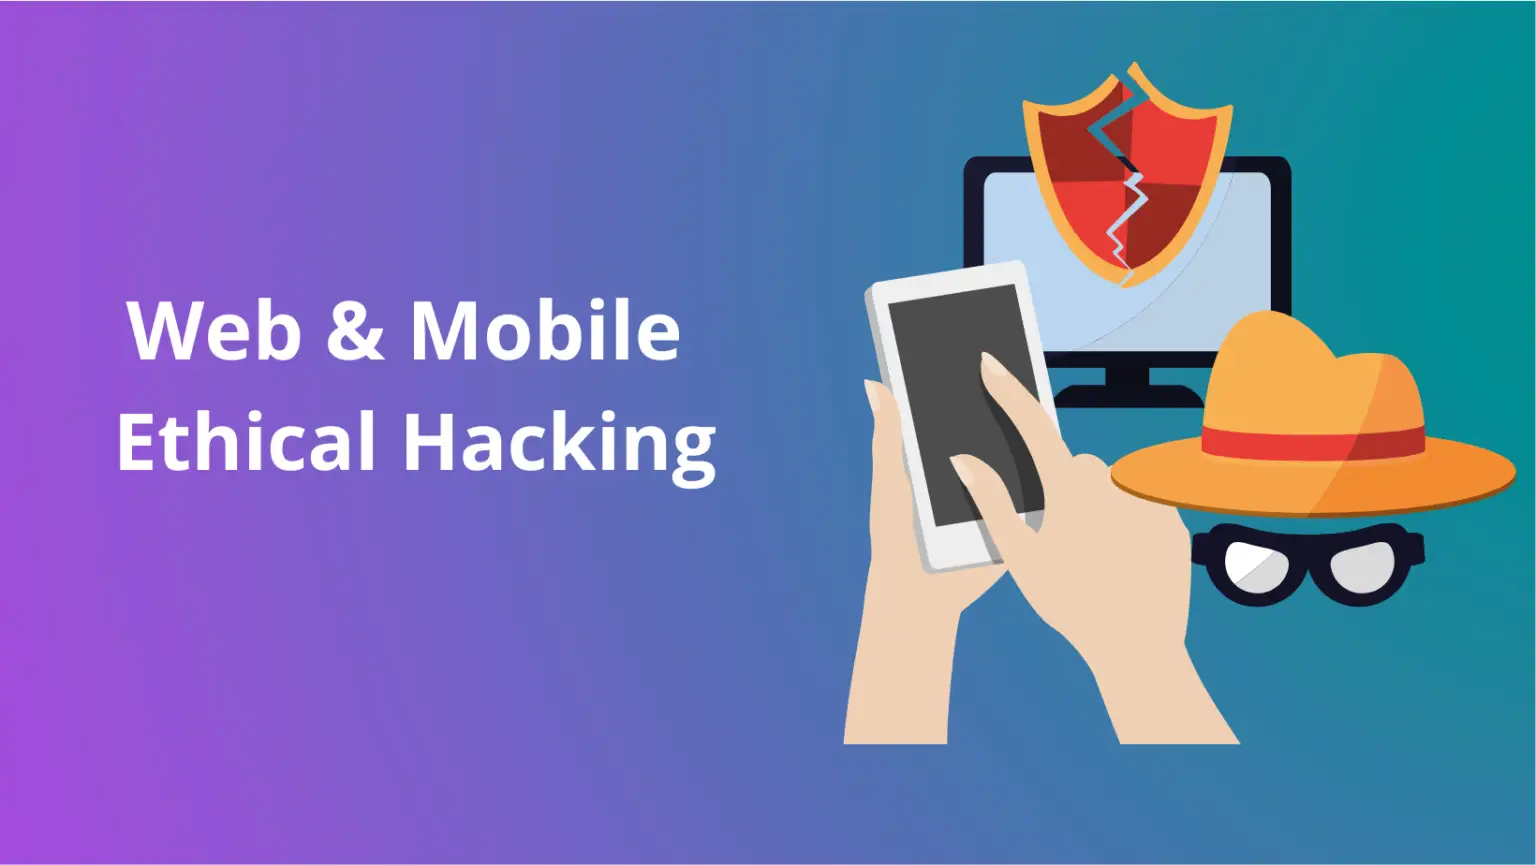 Web & Mobile Ethical Hacking